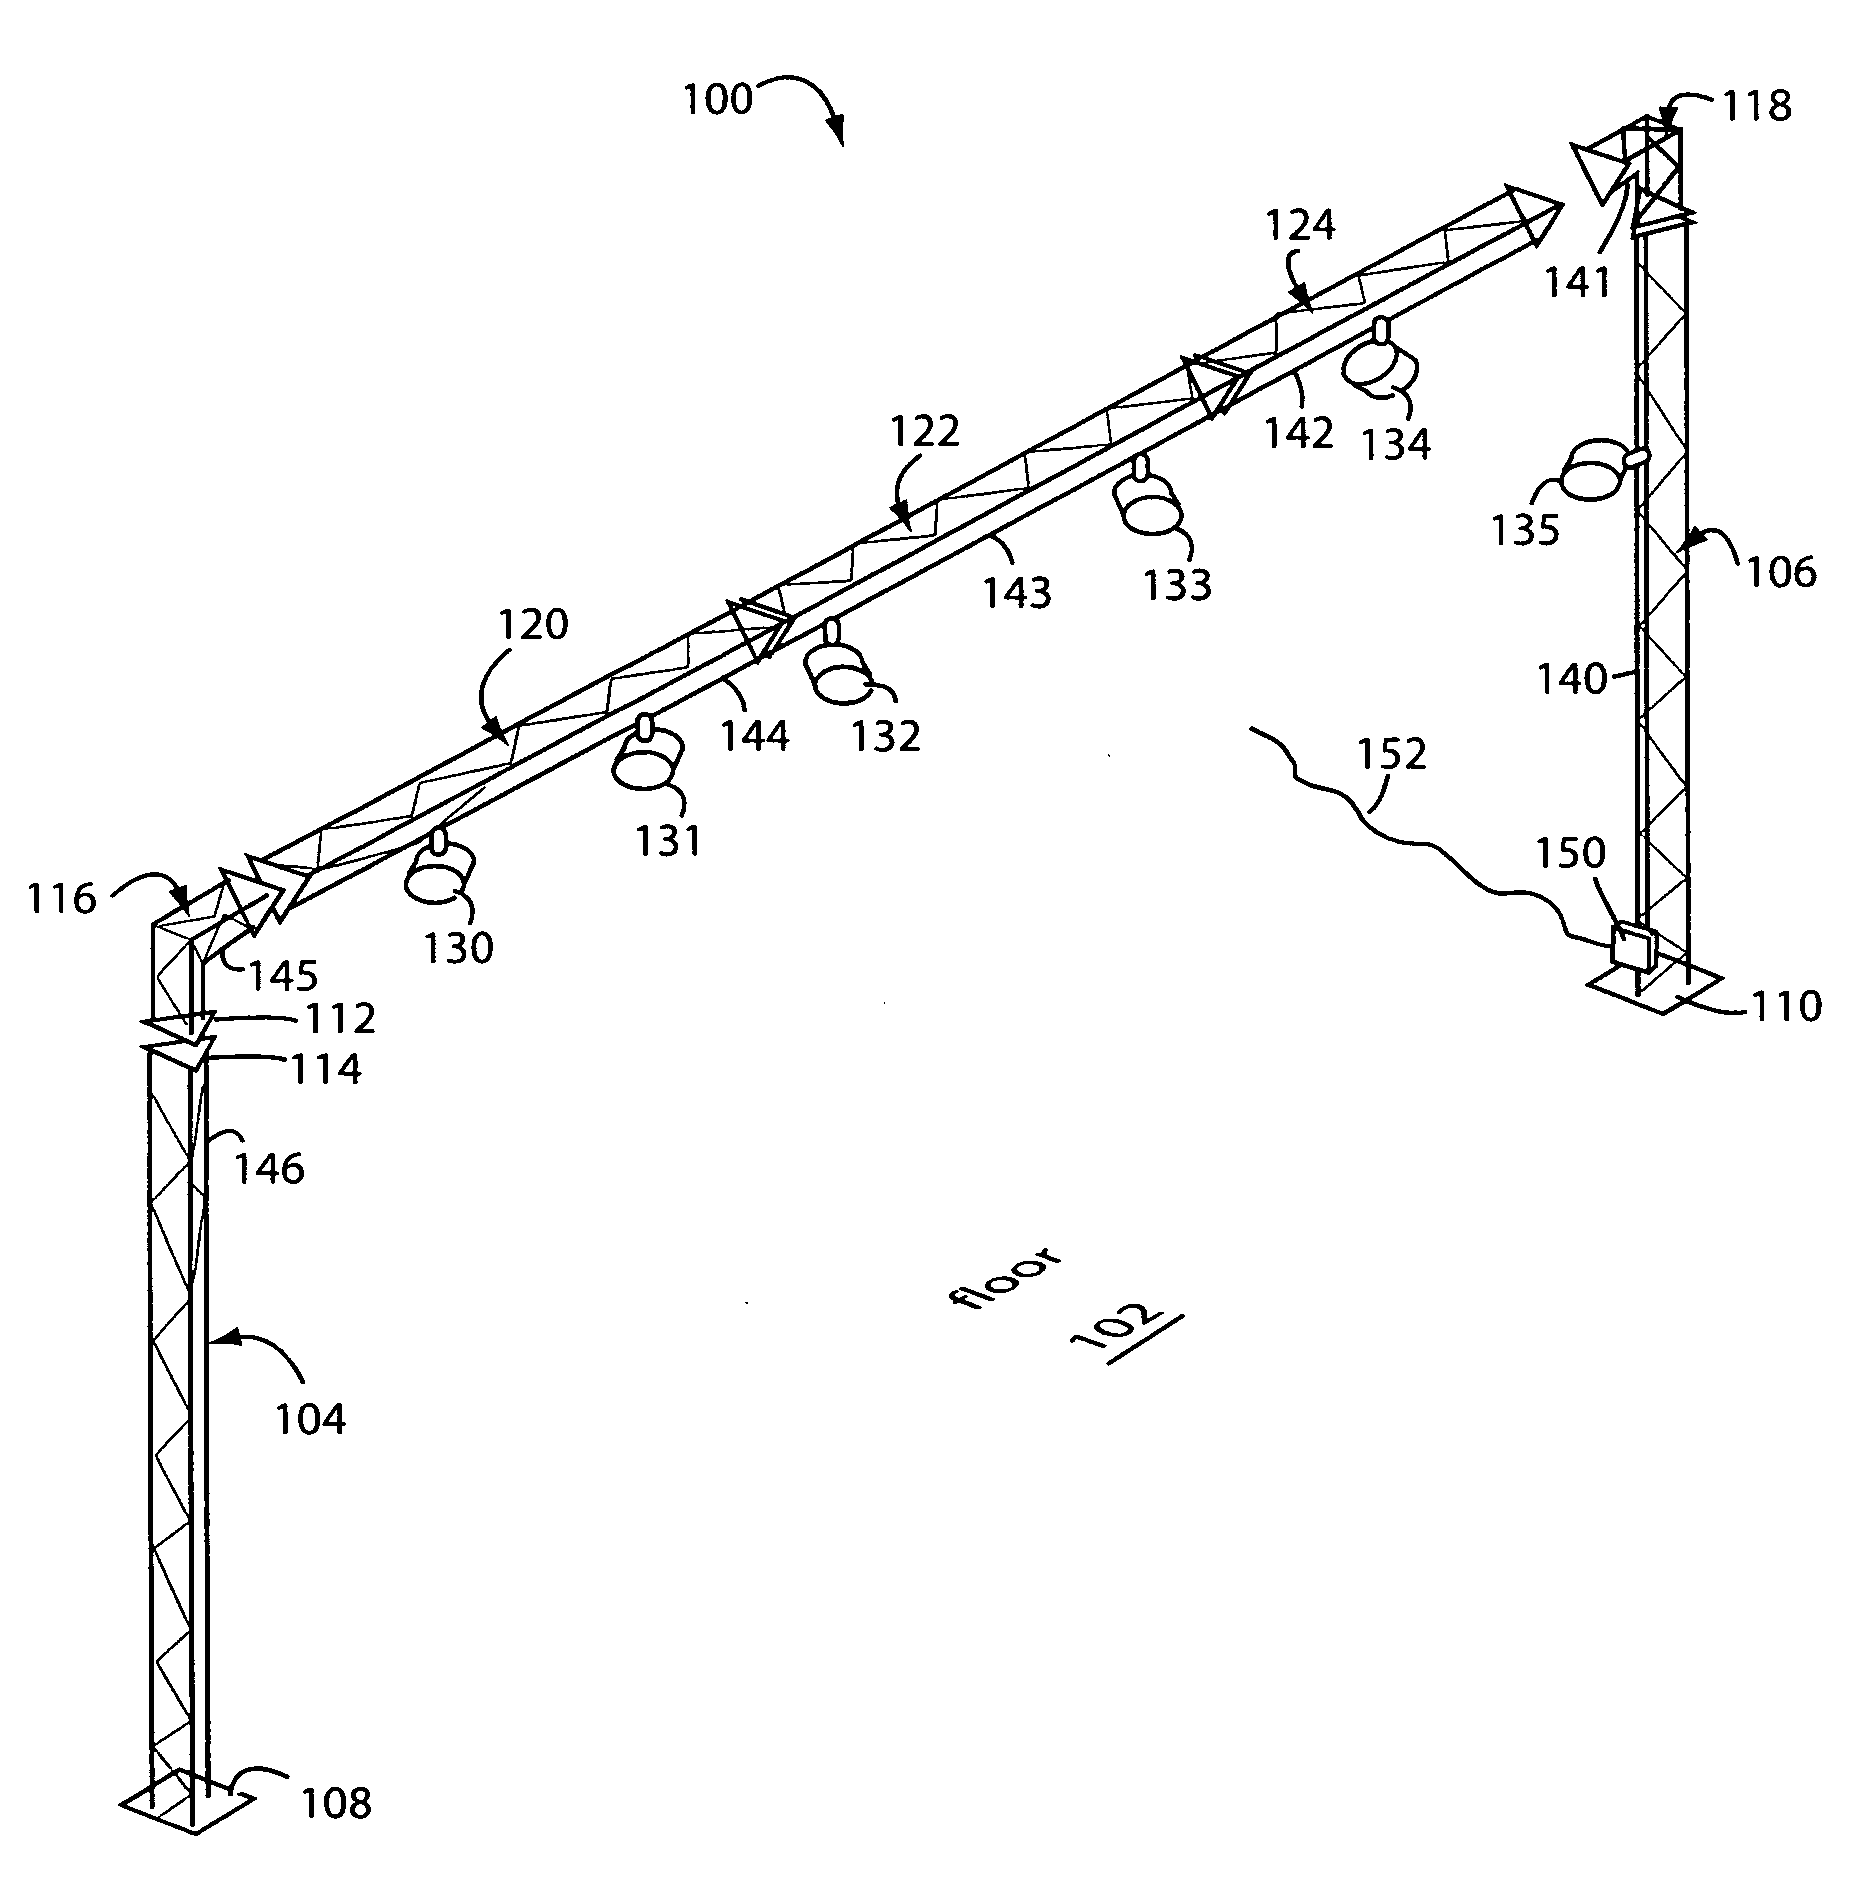 Simplified truss assembly and lighting track interconnection